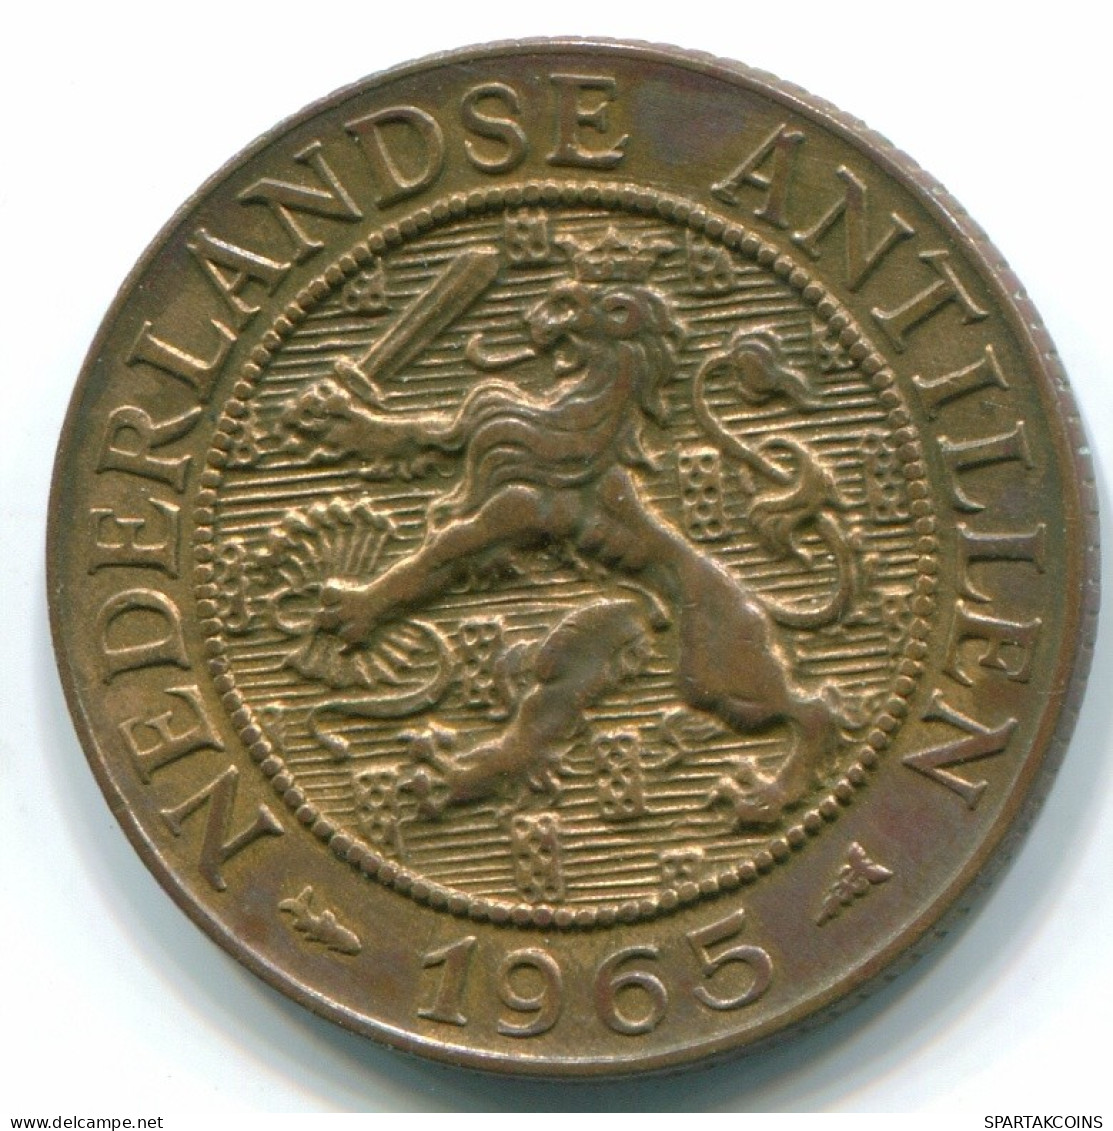 2 1/2 CENT 1965 CURACAO Netherlands Bronze Colonial Coin #S10219.U.A - Curacao